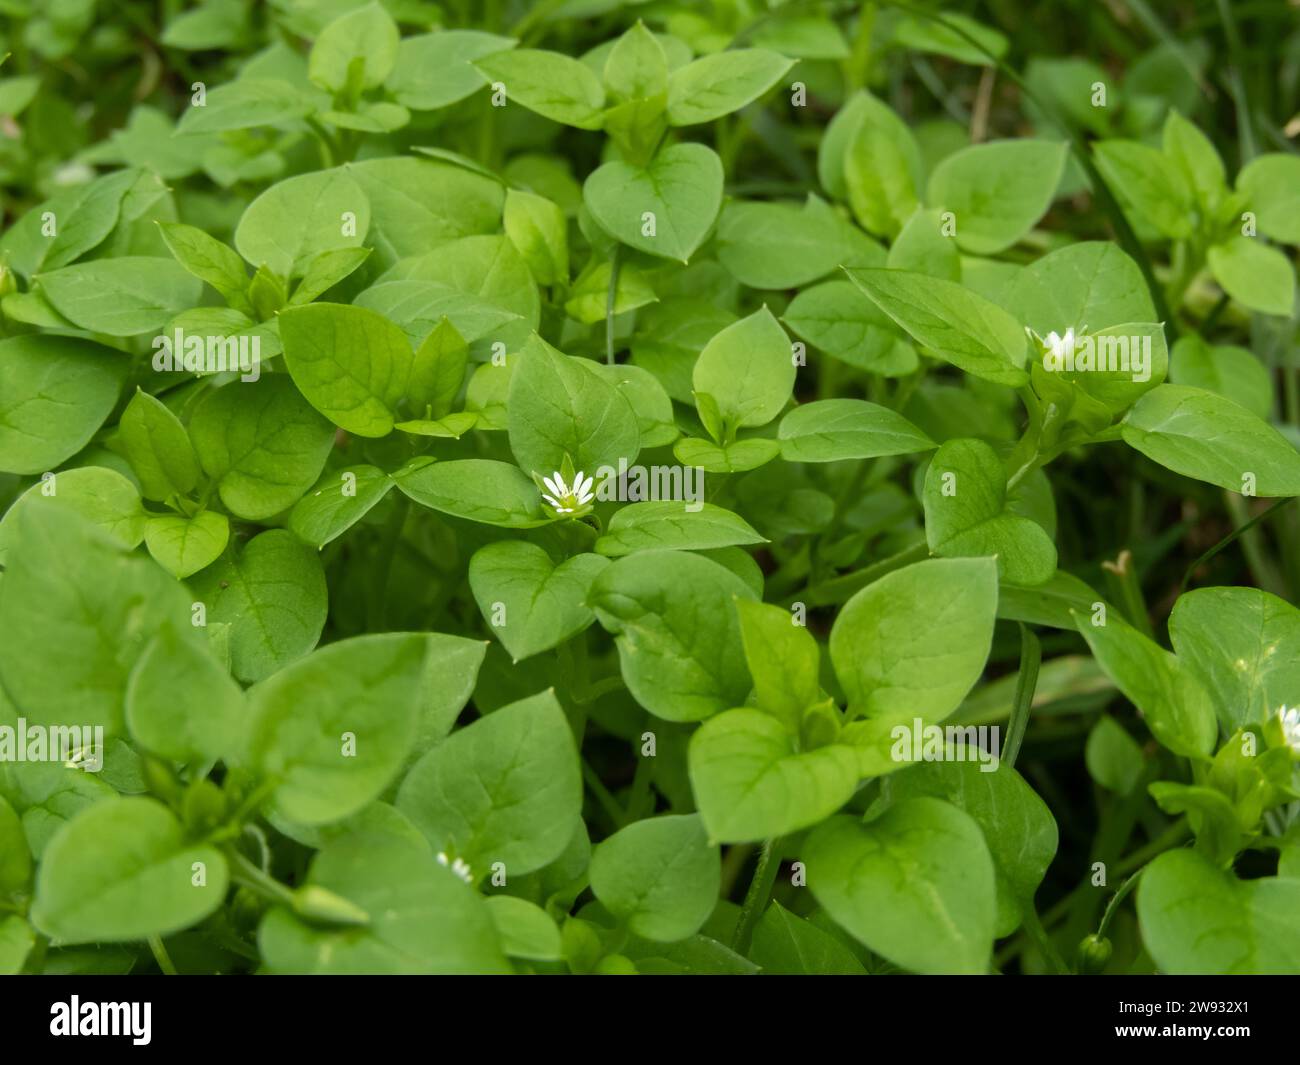 Stellaria media or chickweed or winterweed white flower. Weed plant. Edible salad crop and herbal medicine plant. Stock Photo